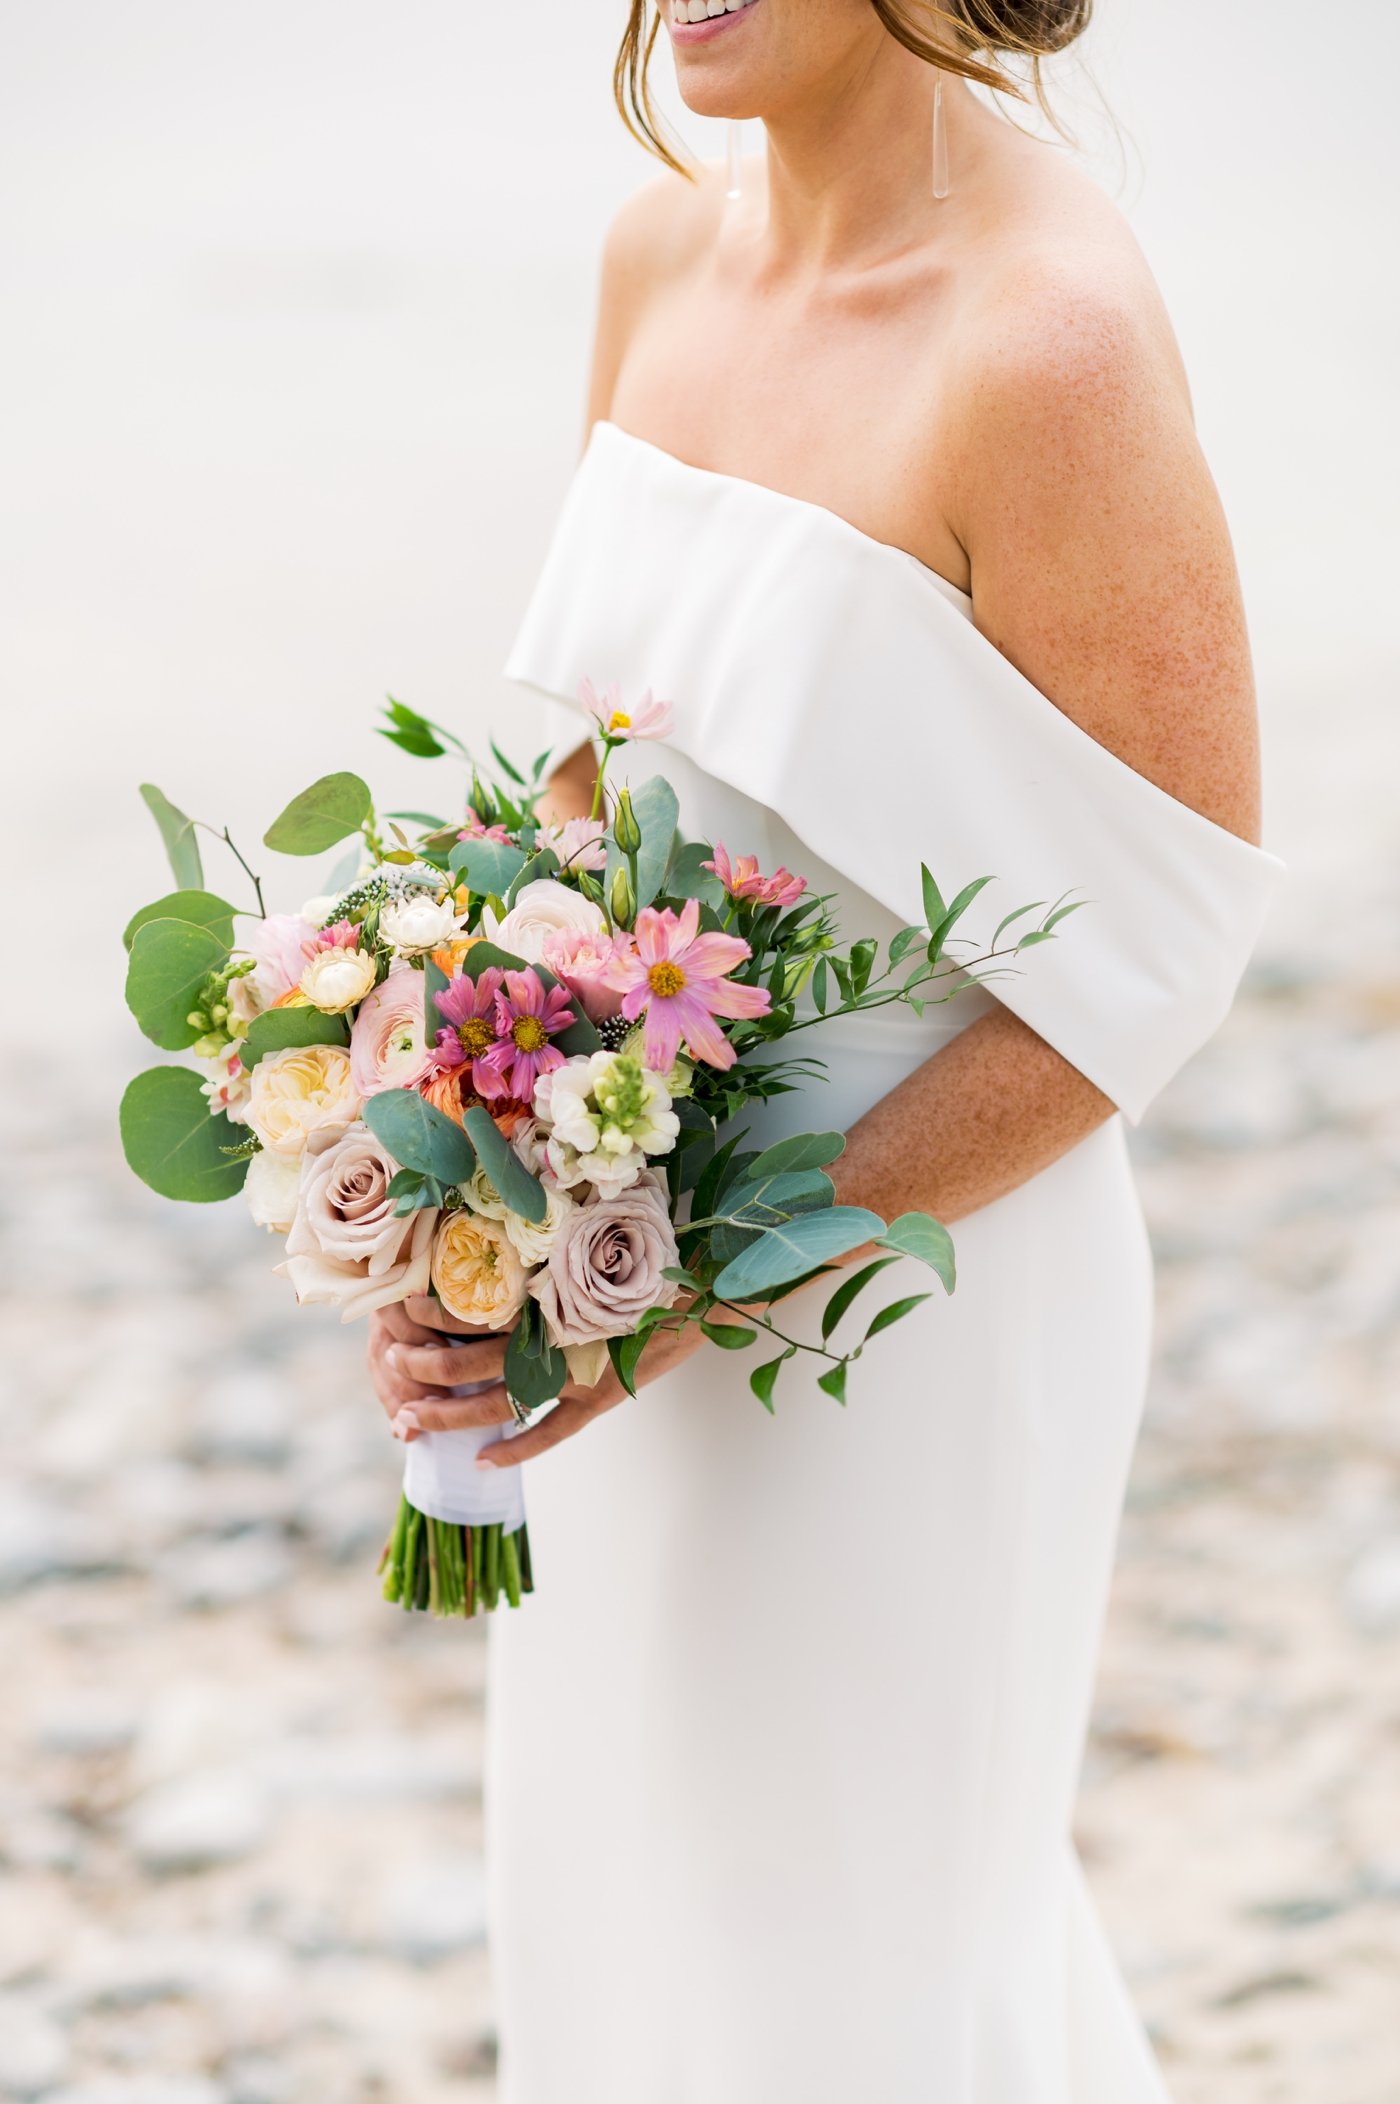 Bridal bouquet filled with blush roses, peach ranunculus, and white delphinium by A Beautiful Wild